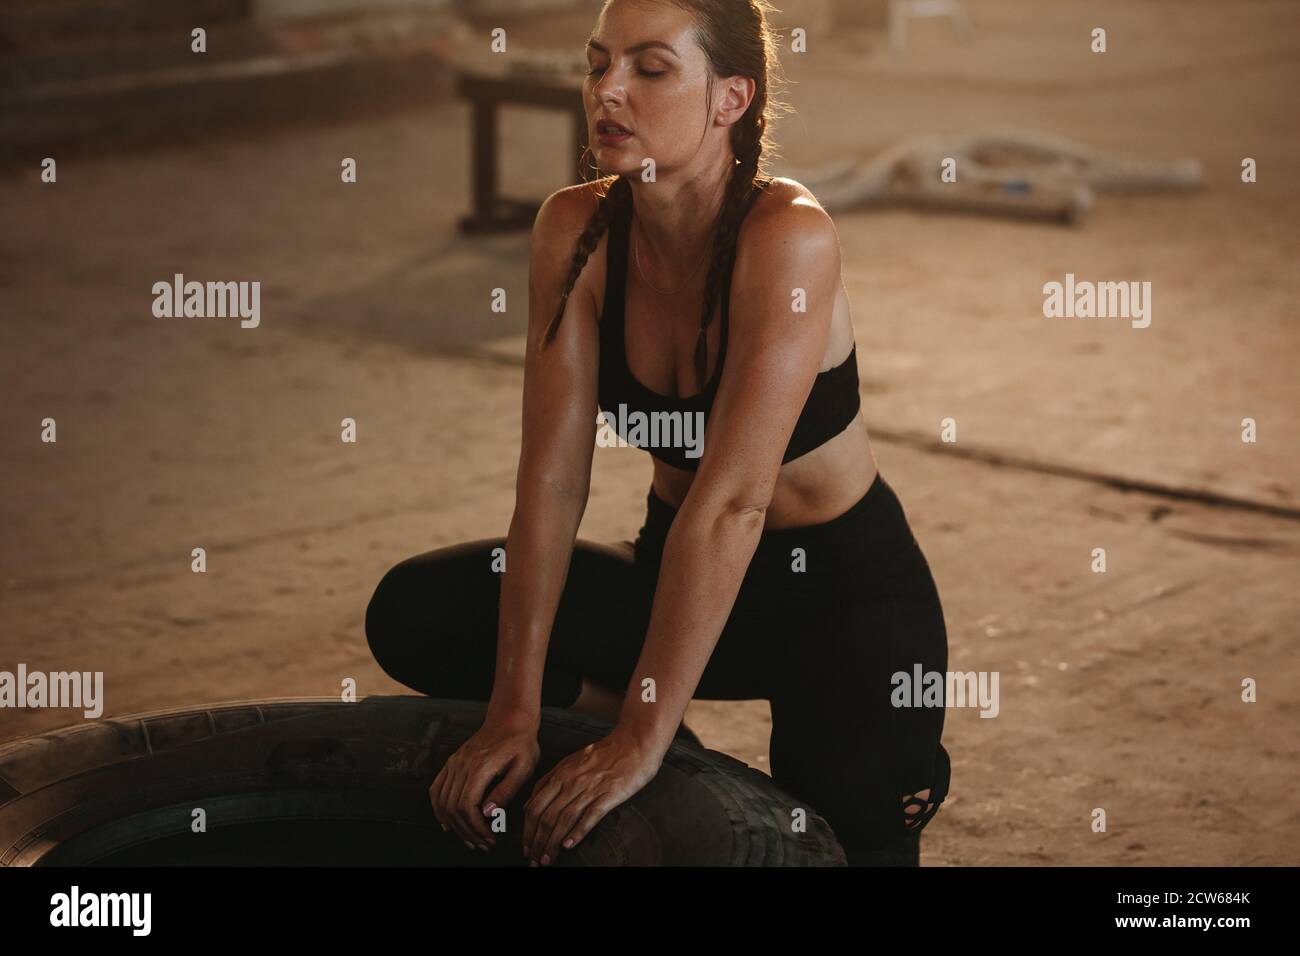 Tired and exhausted female athlete relaxing after workout. Woman taking a break after intense physical training with a tyre at cross workout space. Stock Photo